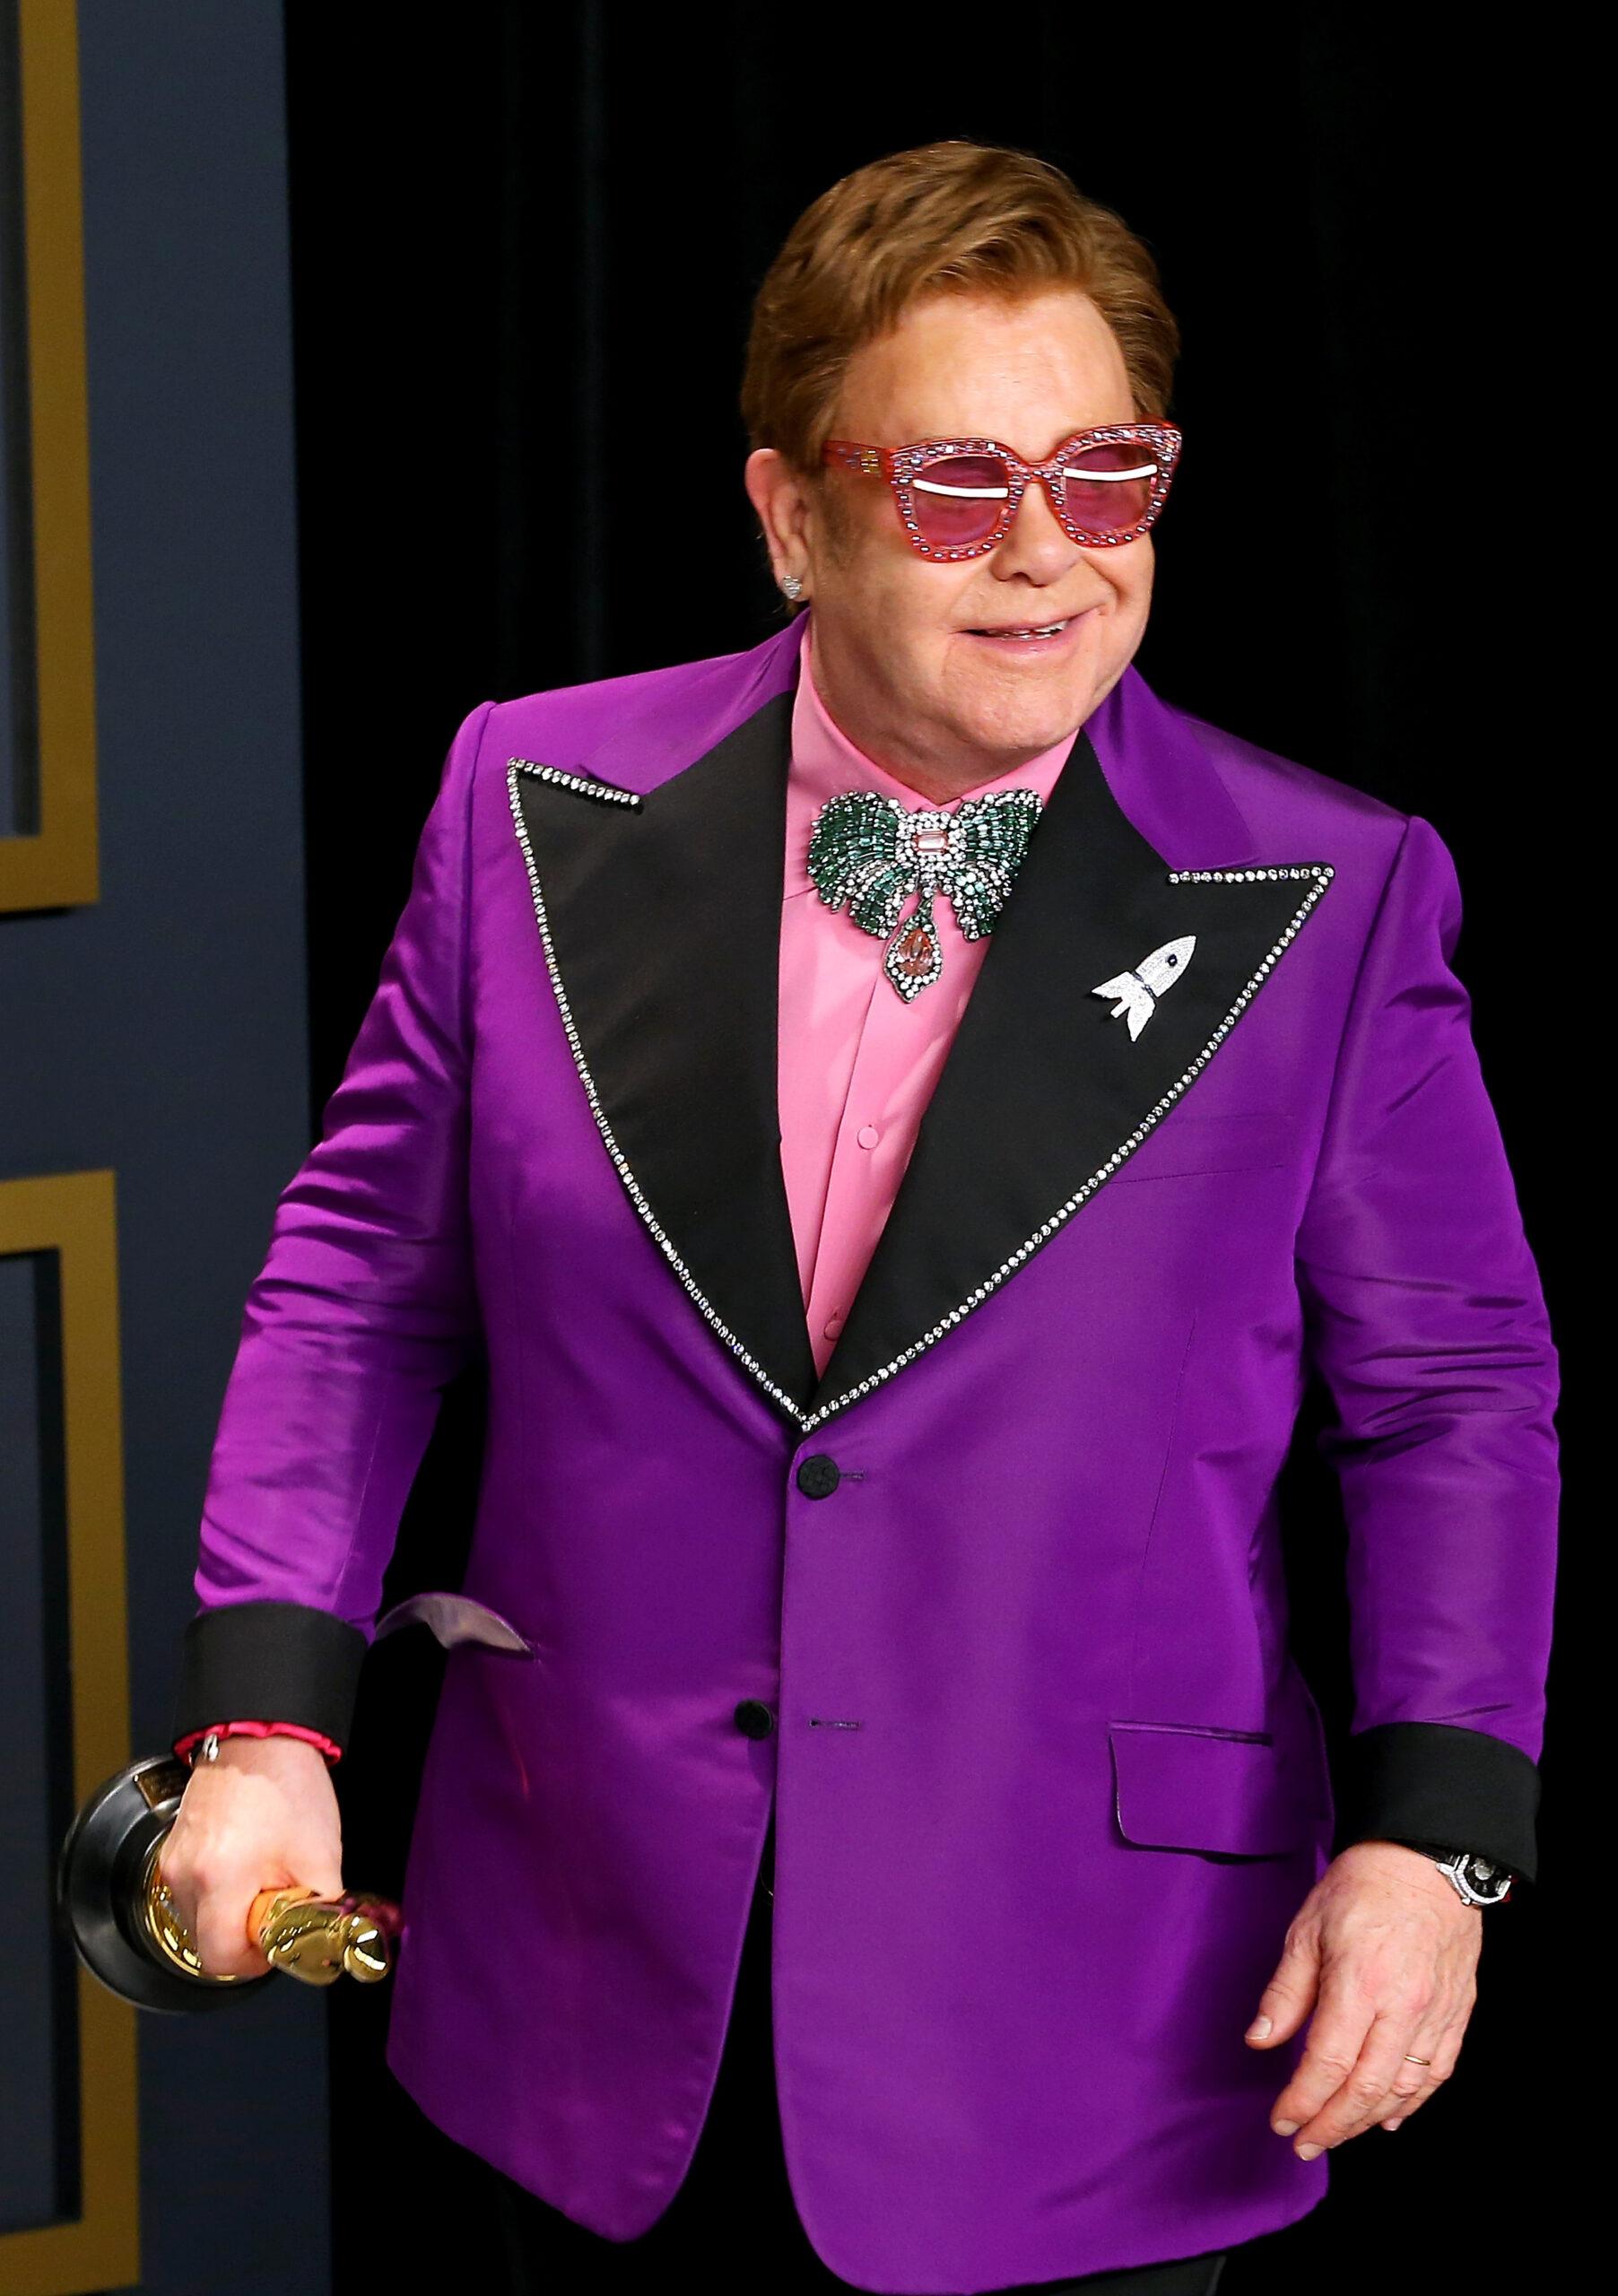 Elton John at the 92nd Annual Academy Awards - Press Room